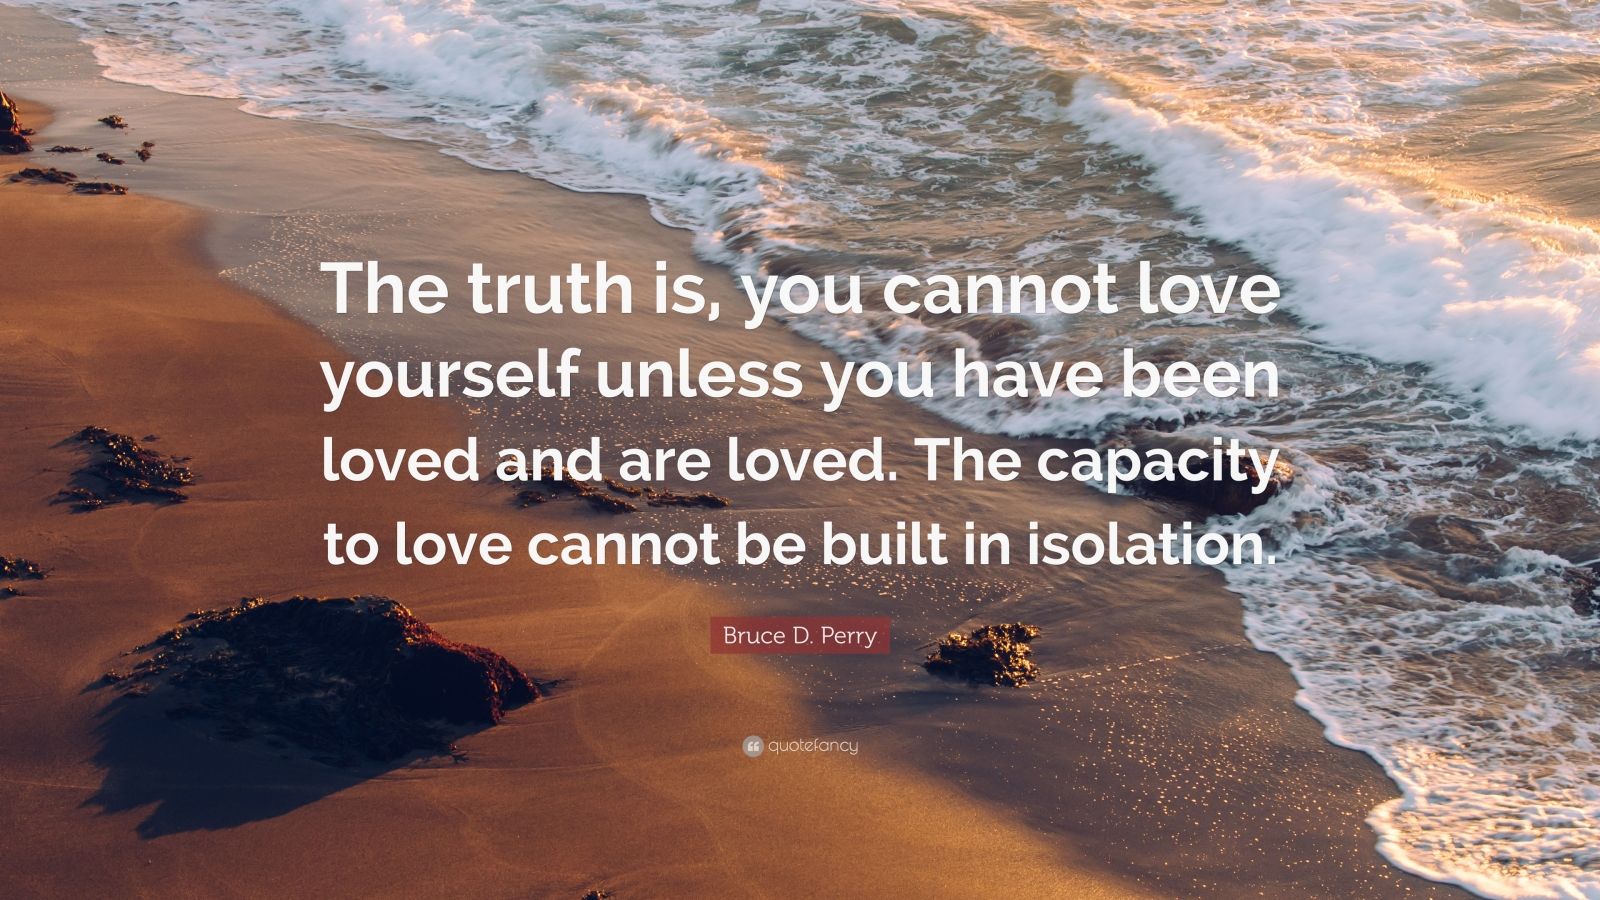 Bruce D. Perry Quote: “The truth is, you cannot love yourself unless ...